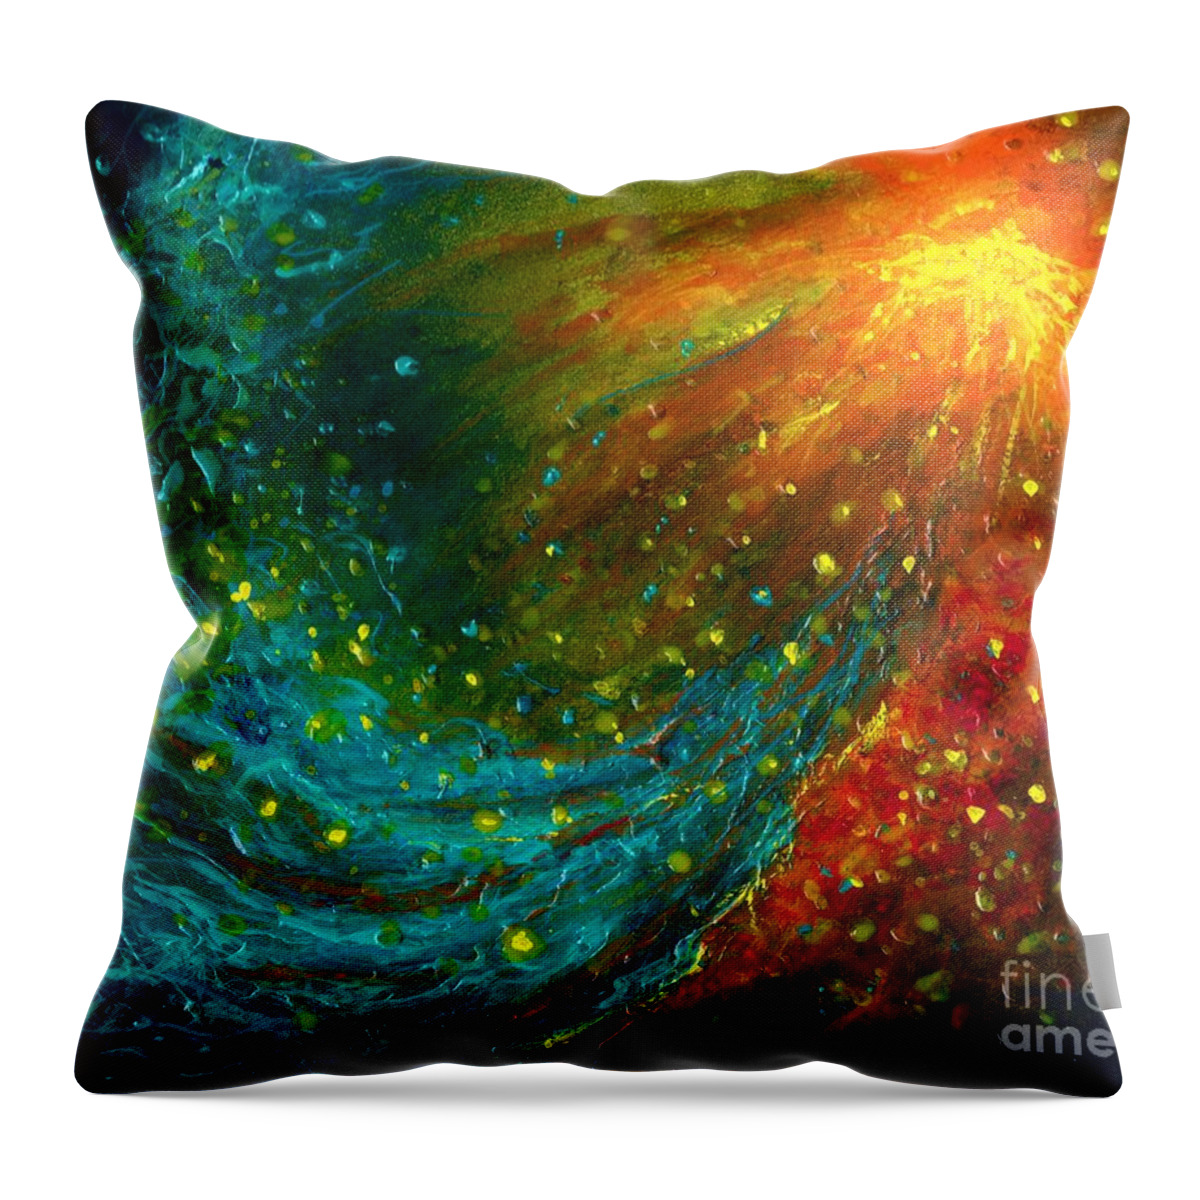 #space #nebulae #colorful #contemporaryart #landscape #modernart #nature #newartwork #painting #scifi #surreal #abstract Throw Pillow featuring the painting Nebulae by Allison Constantino